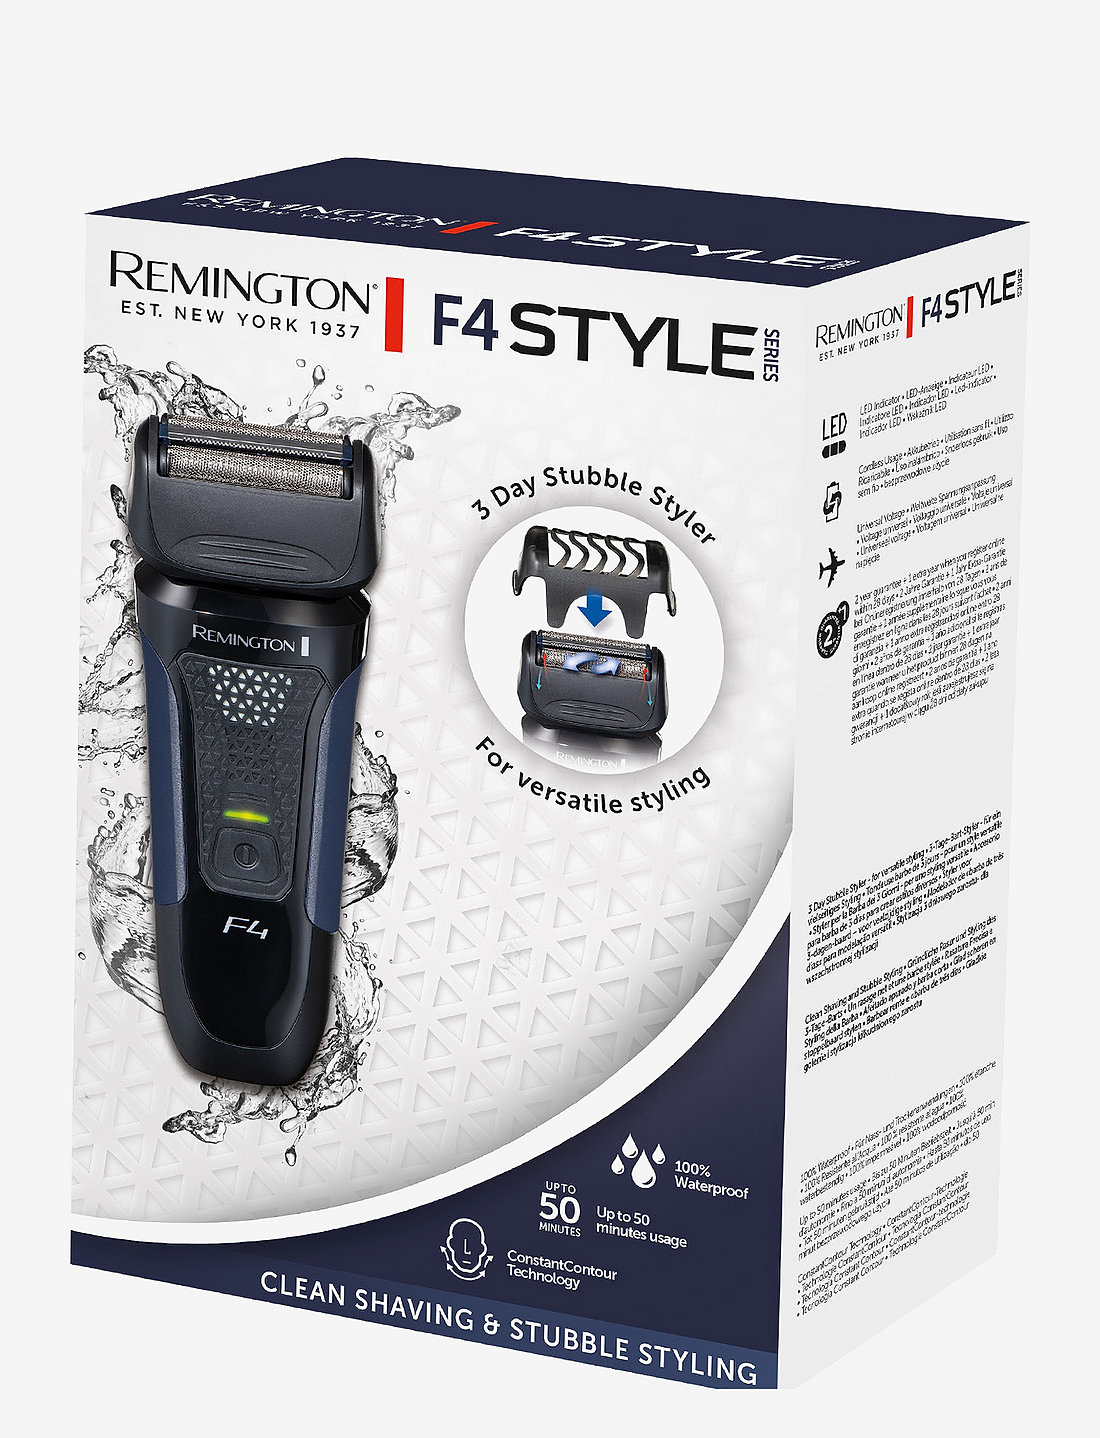 Remington F4000 Style Series Foil Shaver F4 - Bestsellers